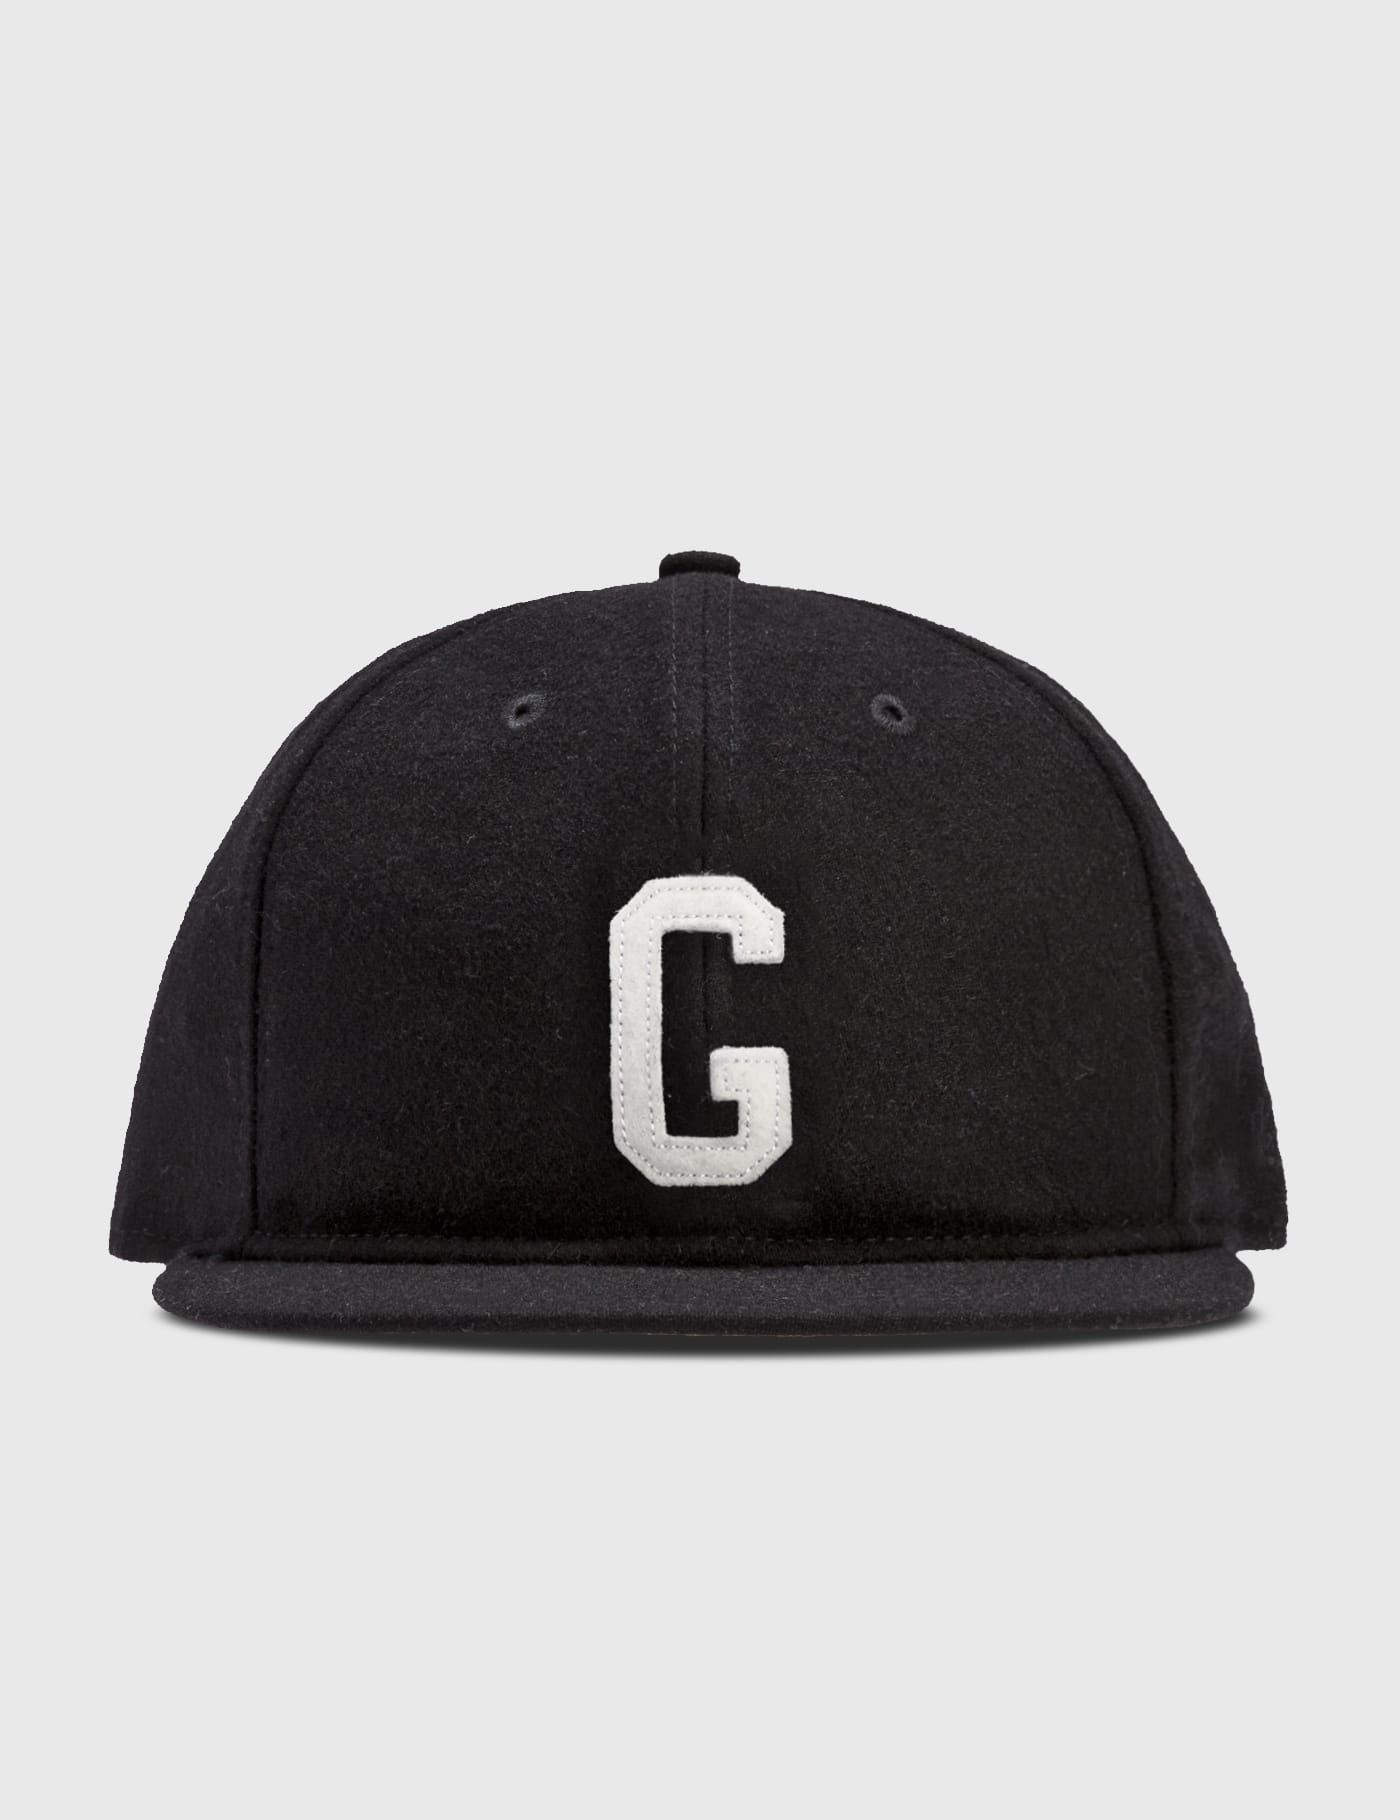 Fear of God - New Era Grays Hat | HBX - Globally Curated Fashion